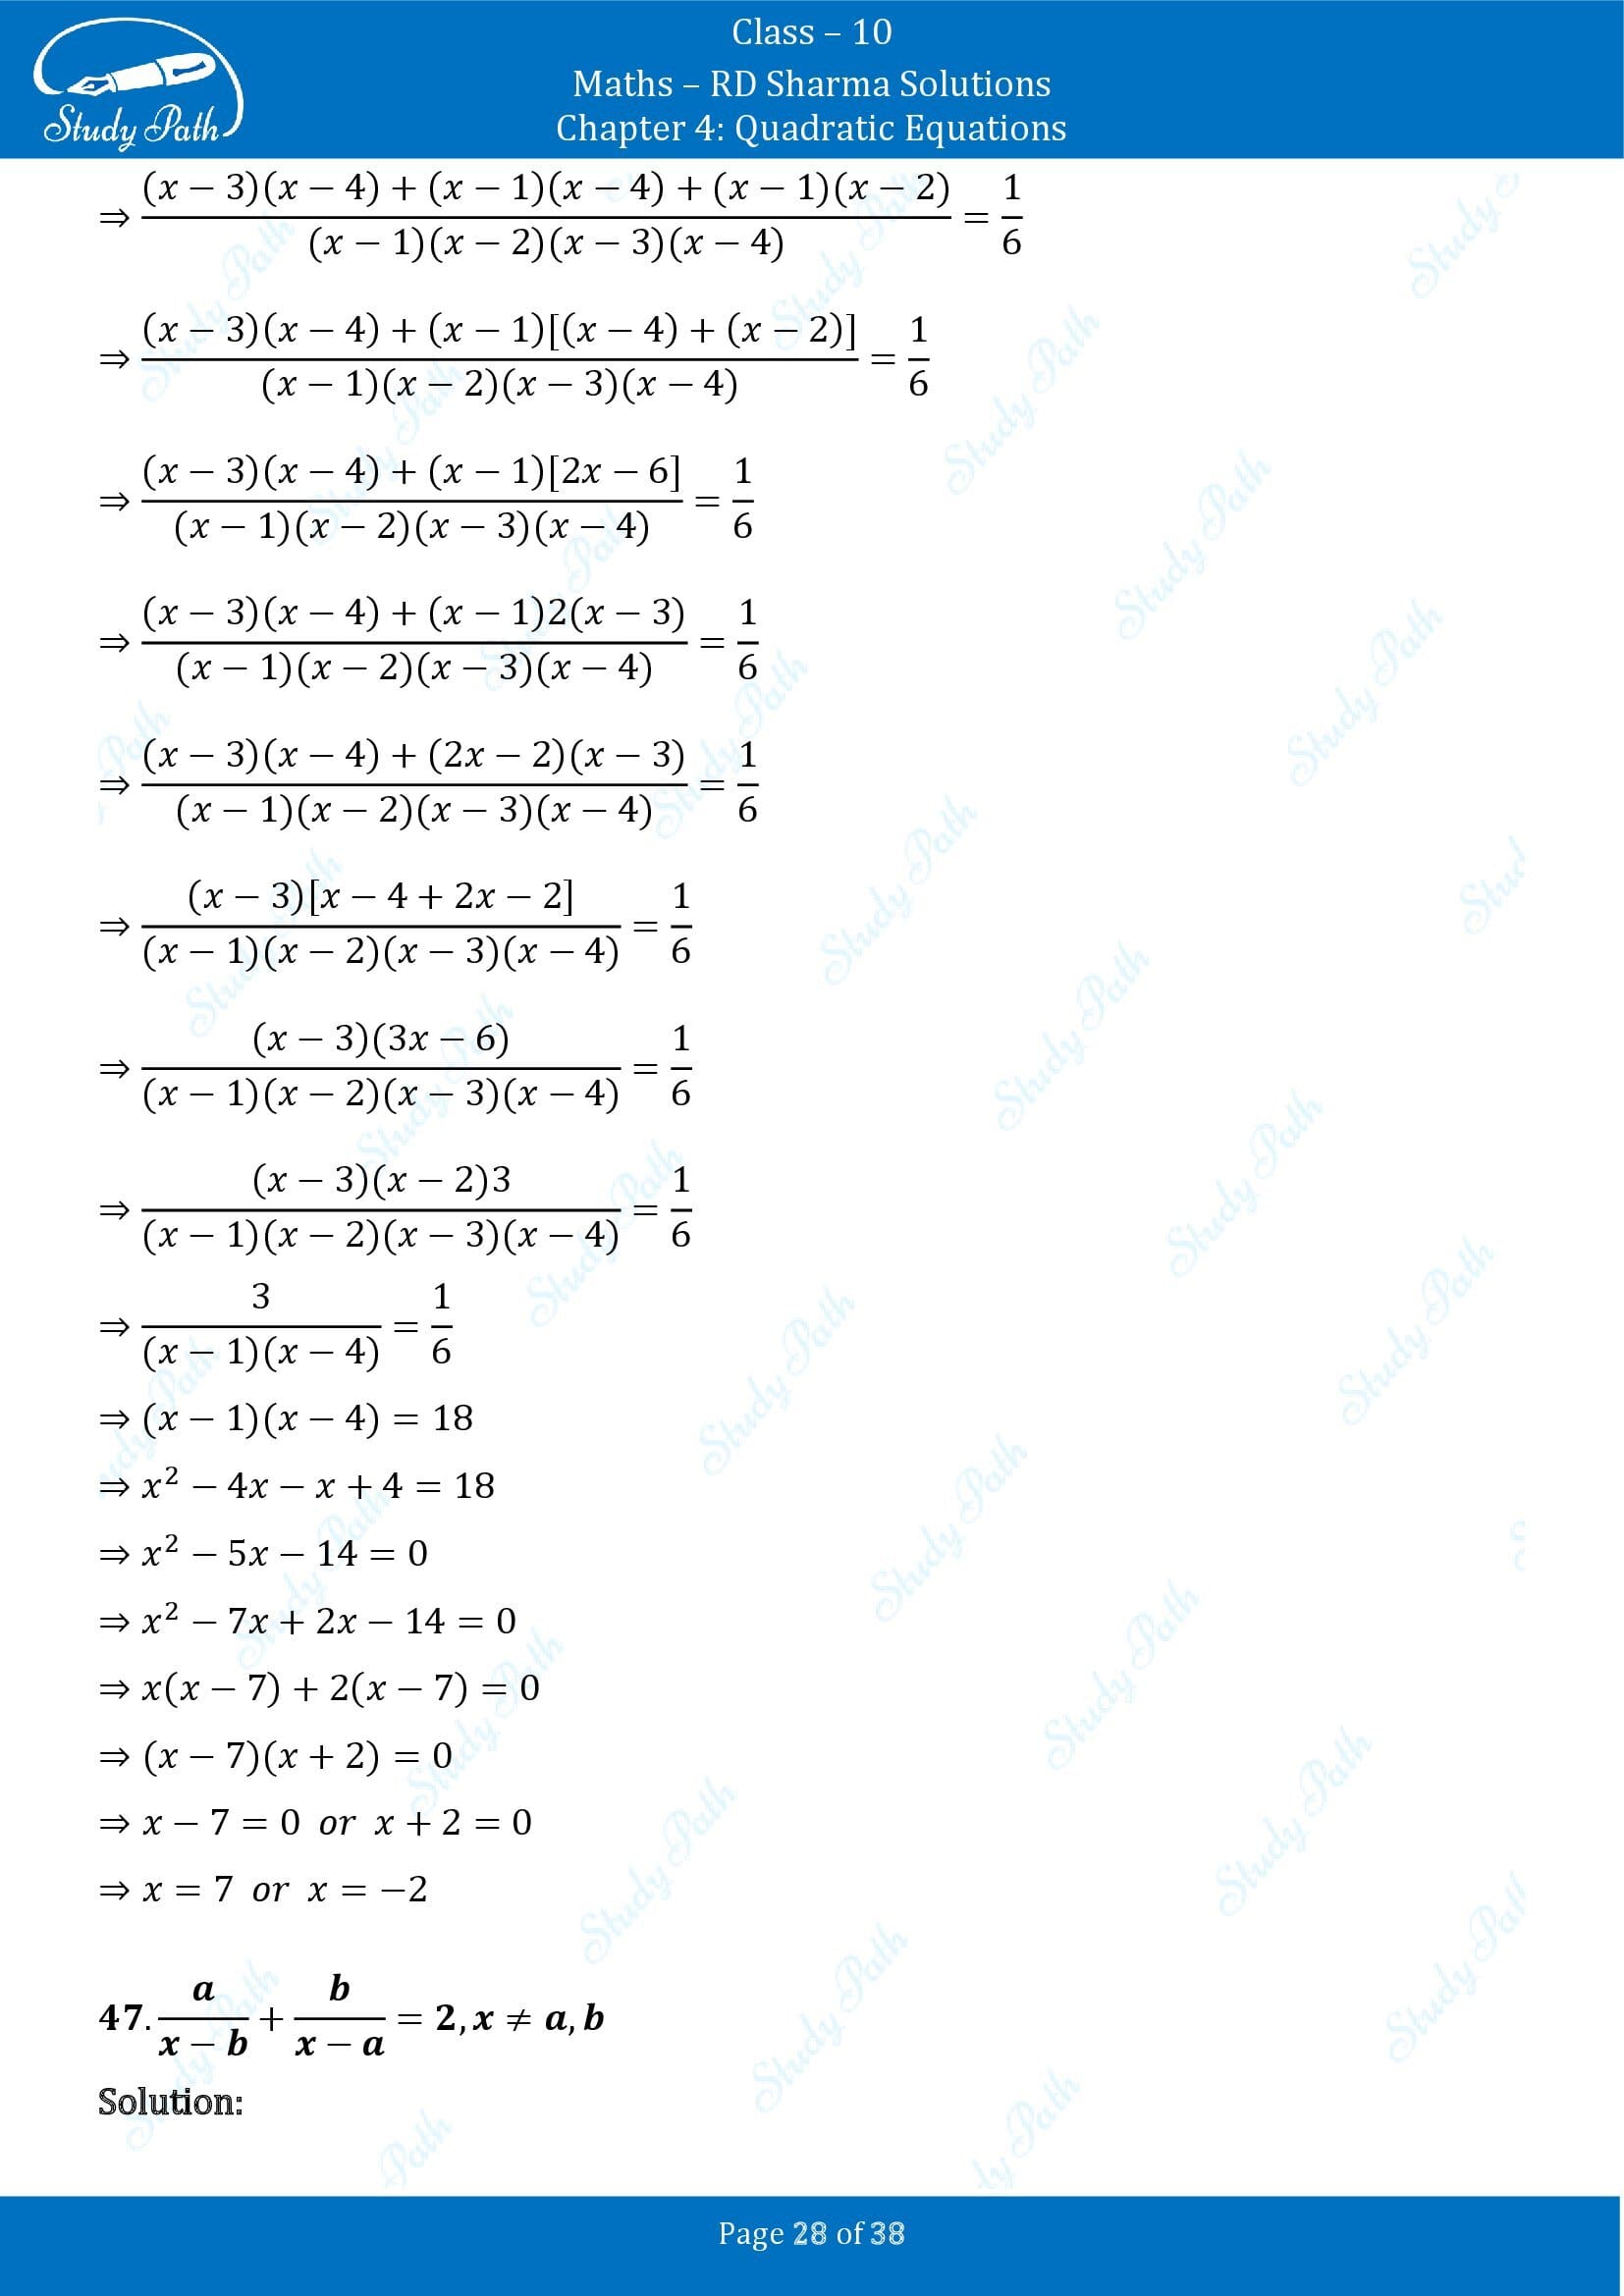 RD Sharma Solutions Class 10 Chapter 4 Quadratic Equations Exercise 4.3 00028